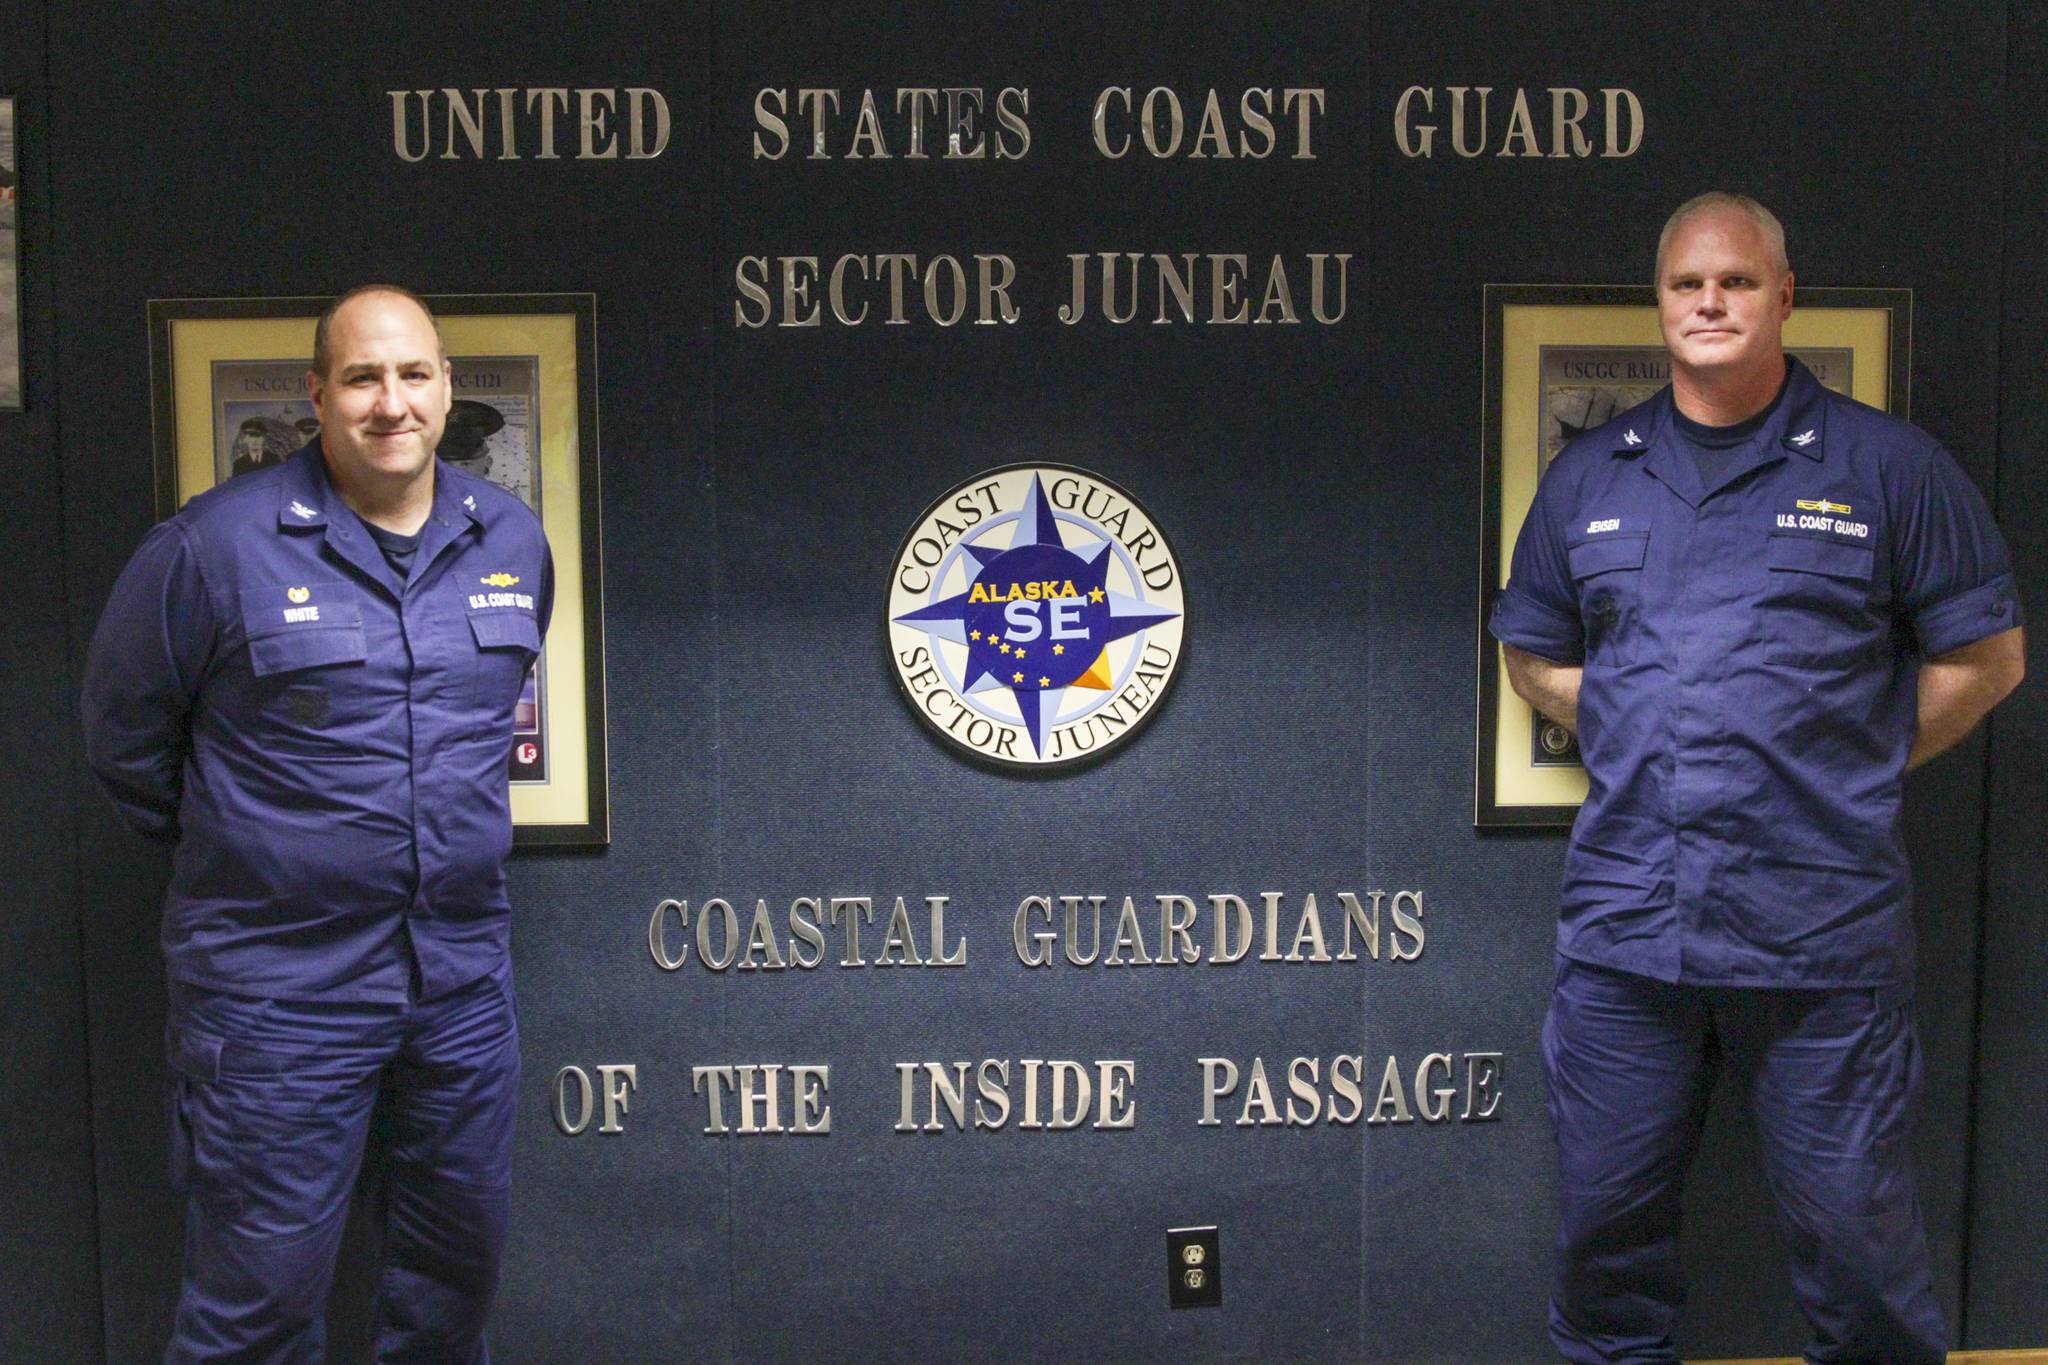 Capt. Darwin A. Jensen, right, will take command of Sector Juneau from Capt. Stephen R. White, left, on July 7, 2021. (Michael S. Lockett / Juneau Empire)